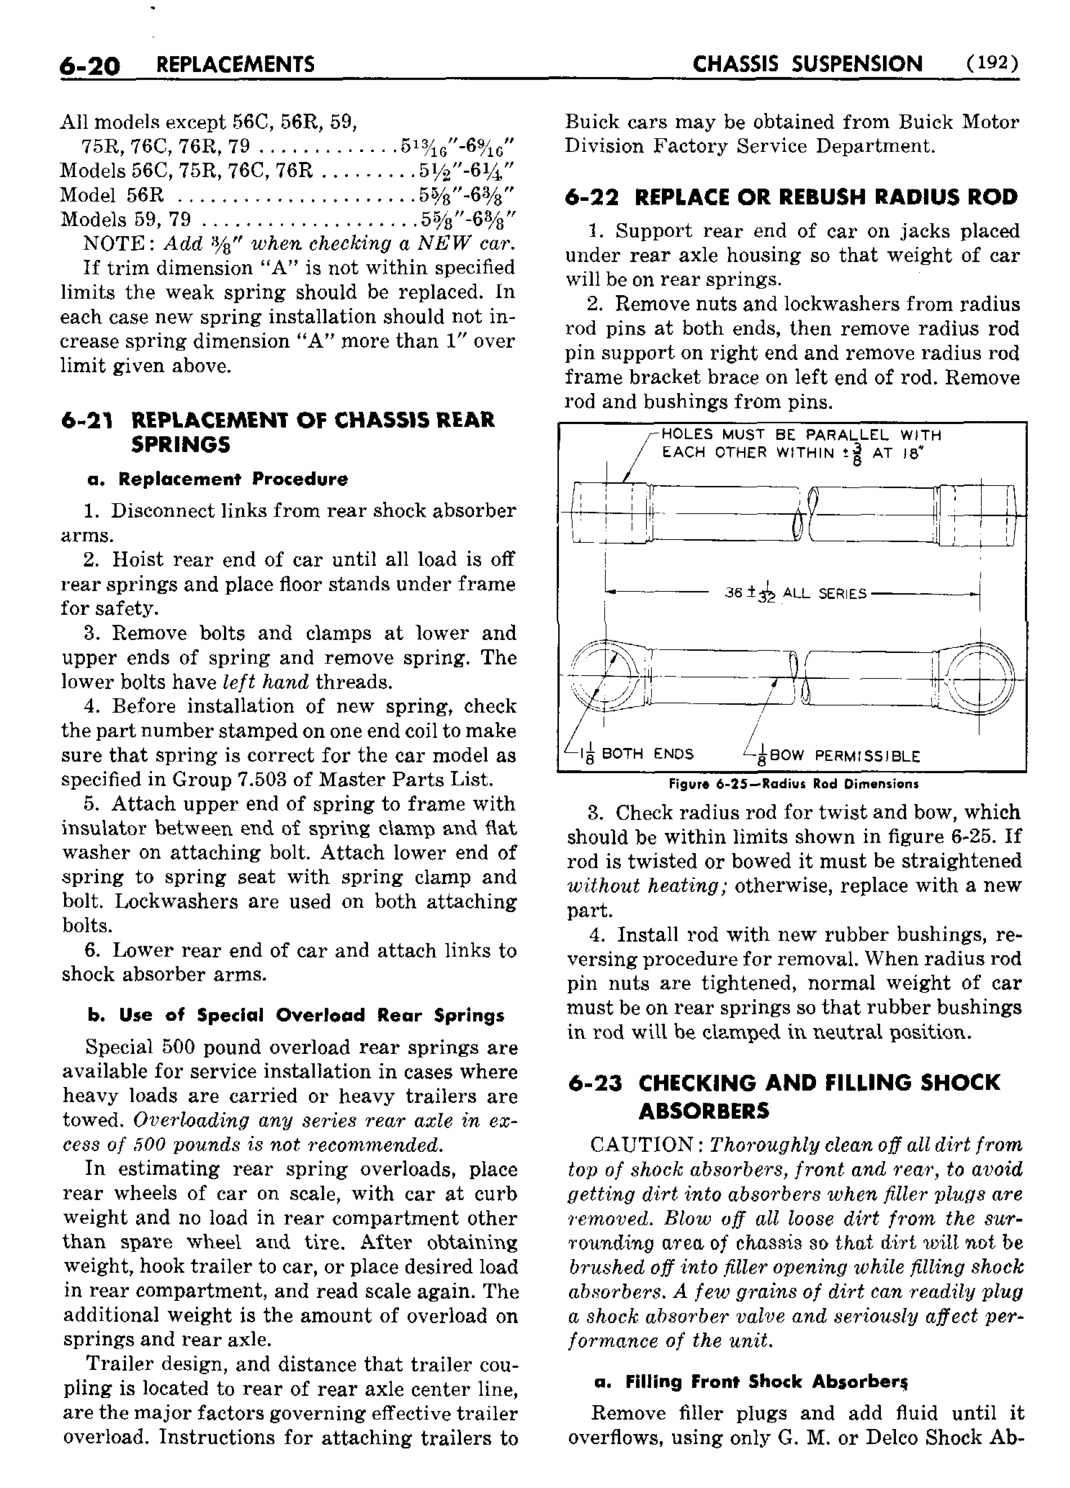 n_07 1950 Buick Shop Manual - Chassis Suspension-020-020.jpg